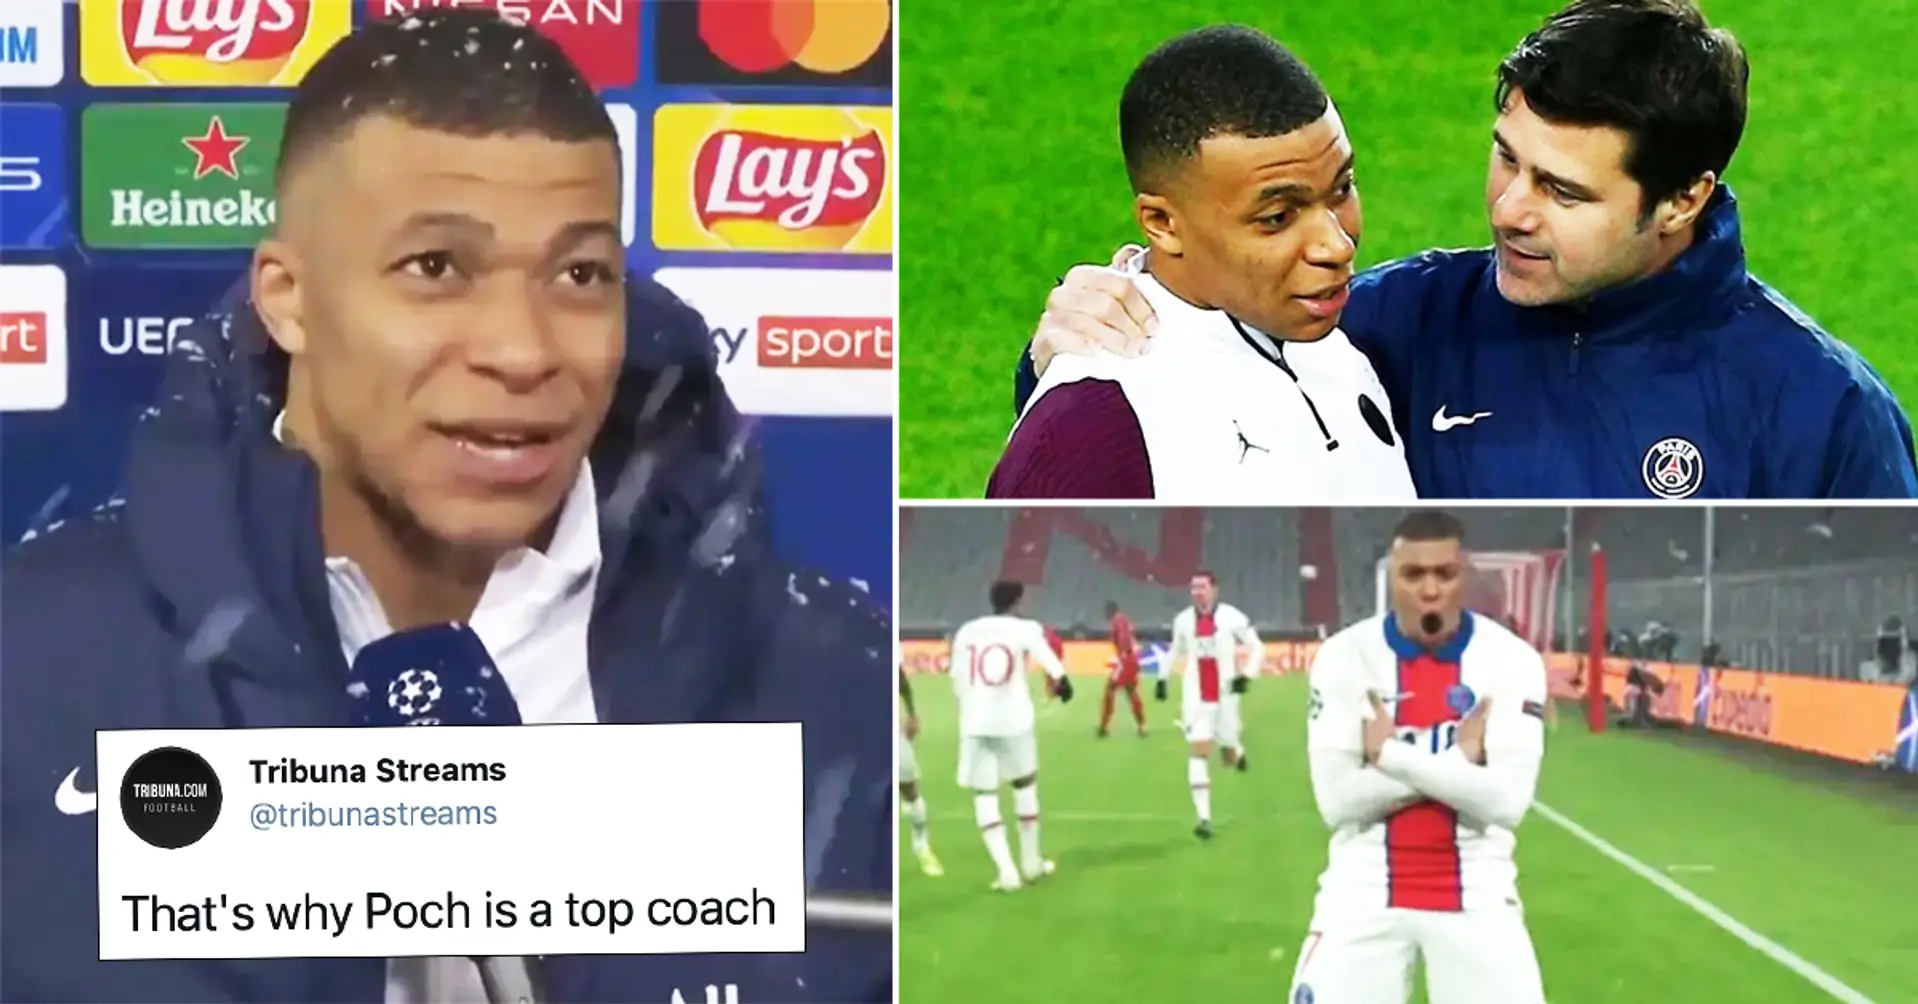 'It worked well'. Kylian Mbappe reveals what exactly Pochettino told him before the game against Bayern